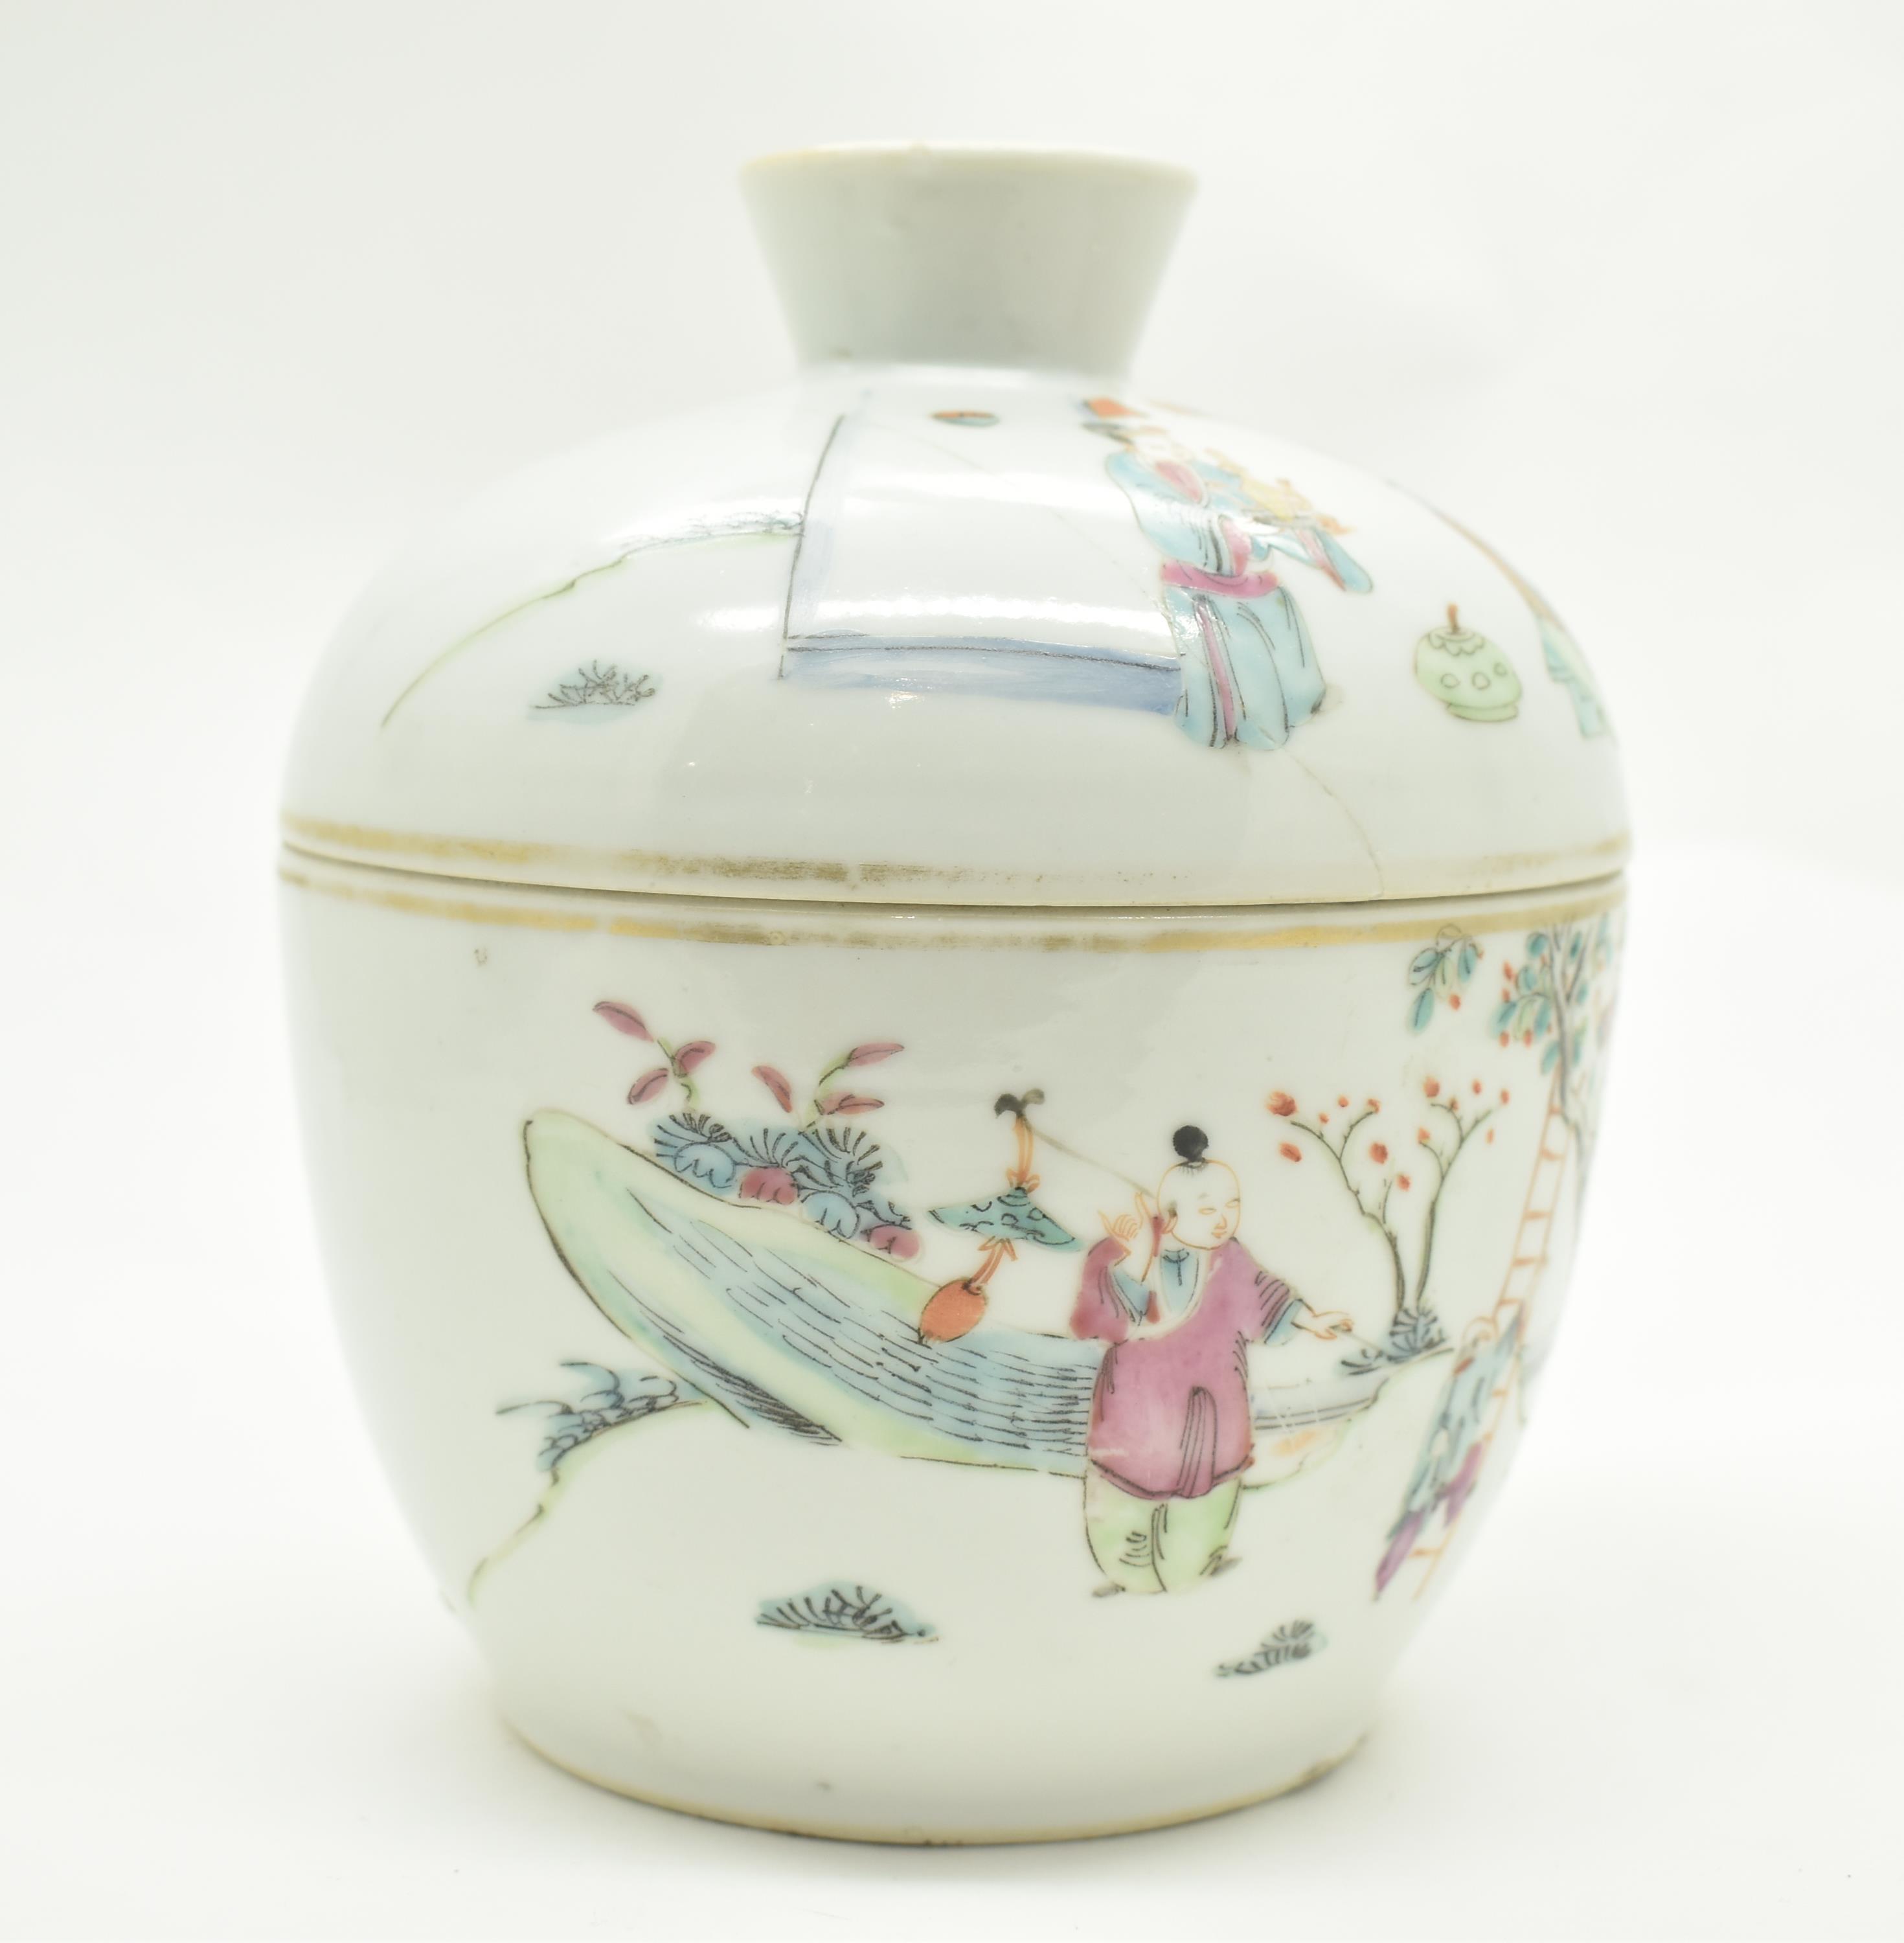 QING TONGZHI FAMILLE ROSE JAR WITH LID 清 同治粉彩盖罐 - Image 5 of 10